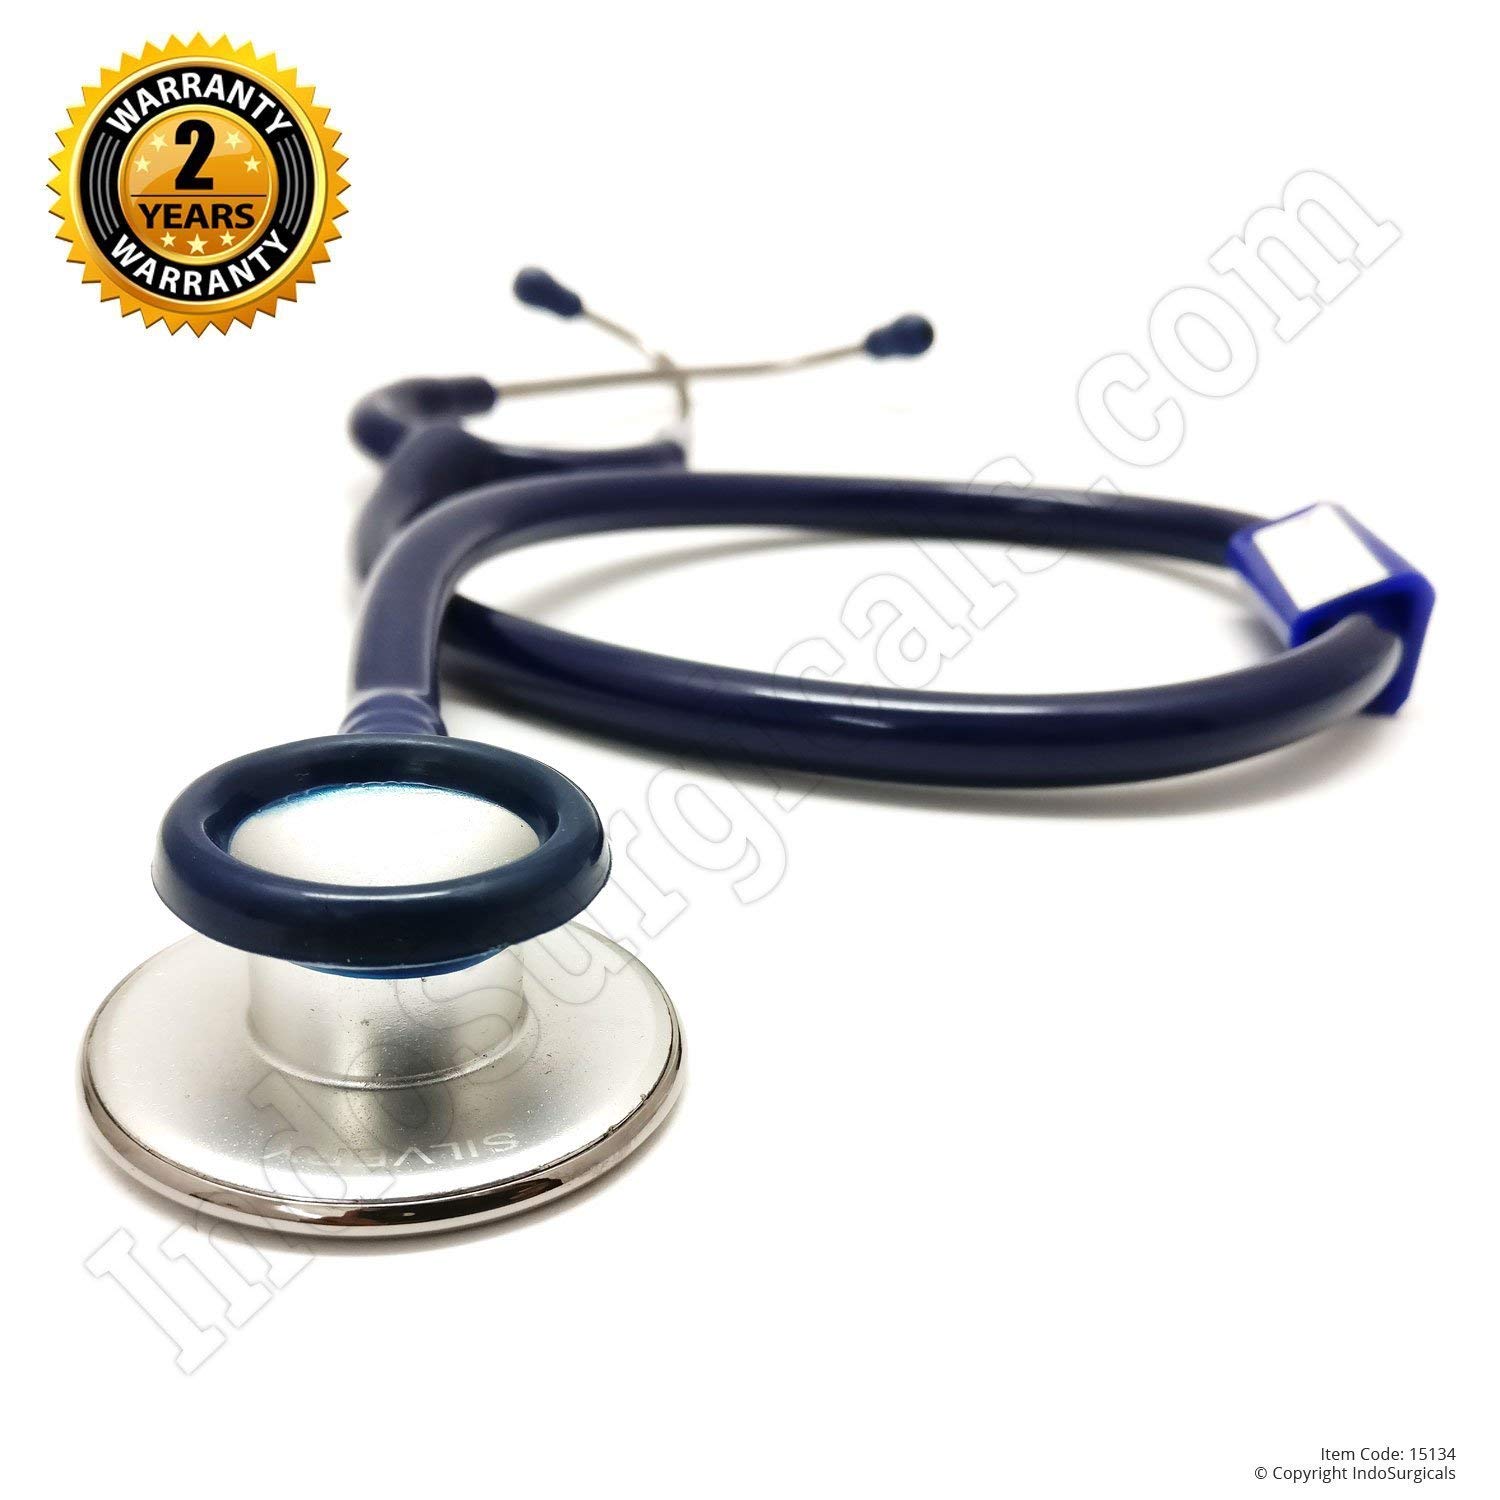 Indosurgicals Silvery Stethoscope (Blue Color Tube): Amazon.in ...